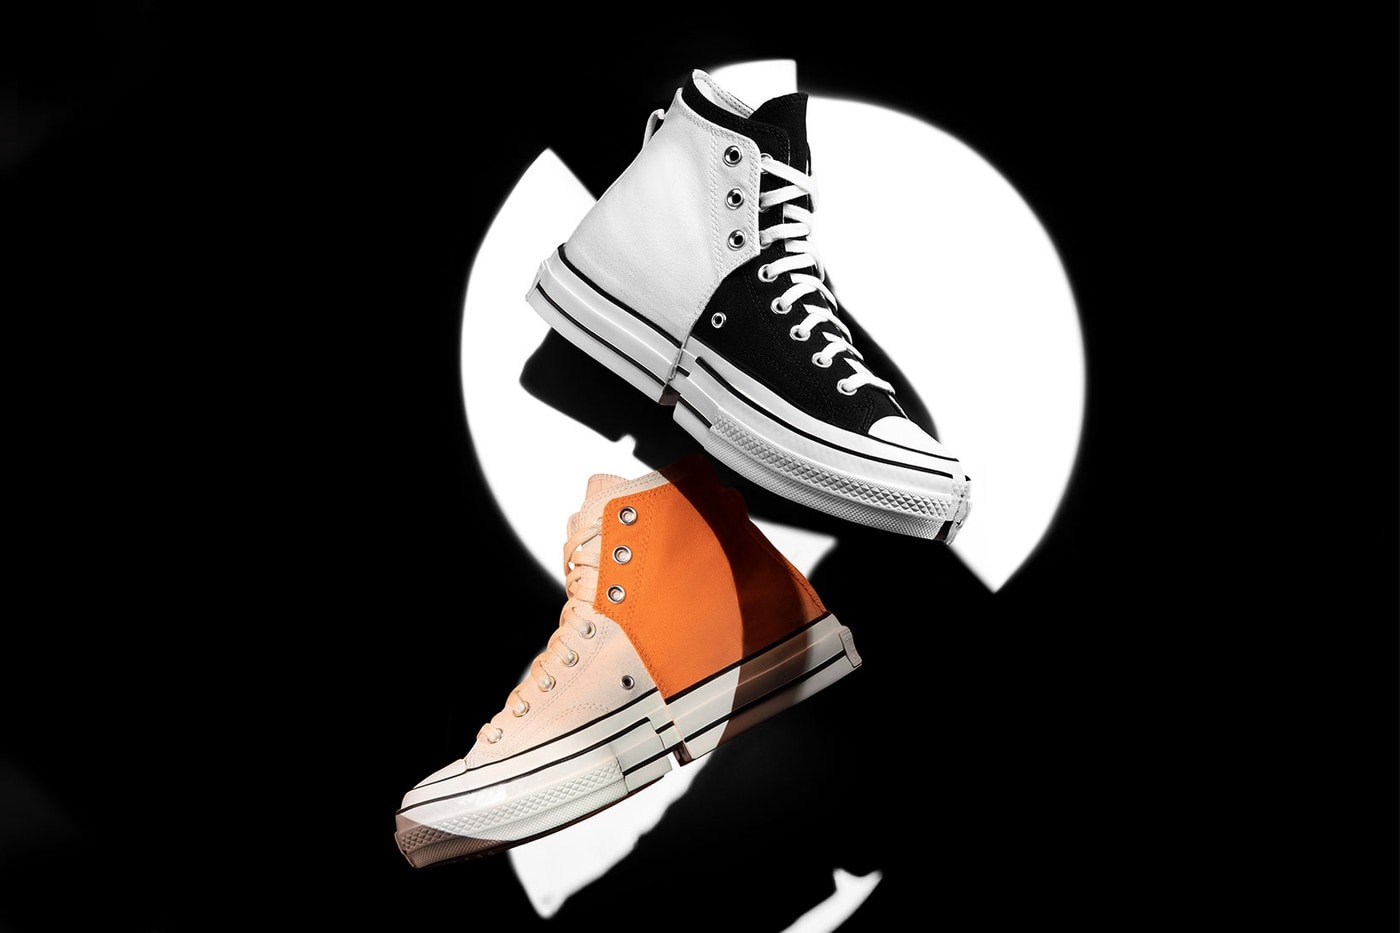 Feng Chen Wang x Converse Chuck 70 "2-In-1" Sneaker Collaboration Release Information First Closer Look Chinese Womenswear Designer Unisex Shoes Footwear Drop Date Hybrid Remade DIY Limited Edition HYPE